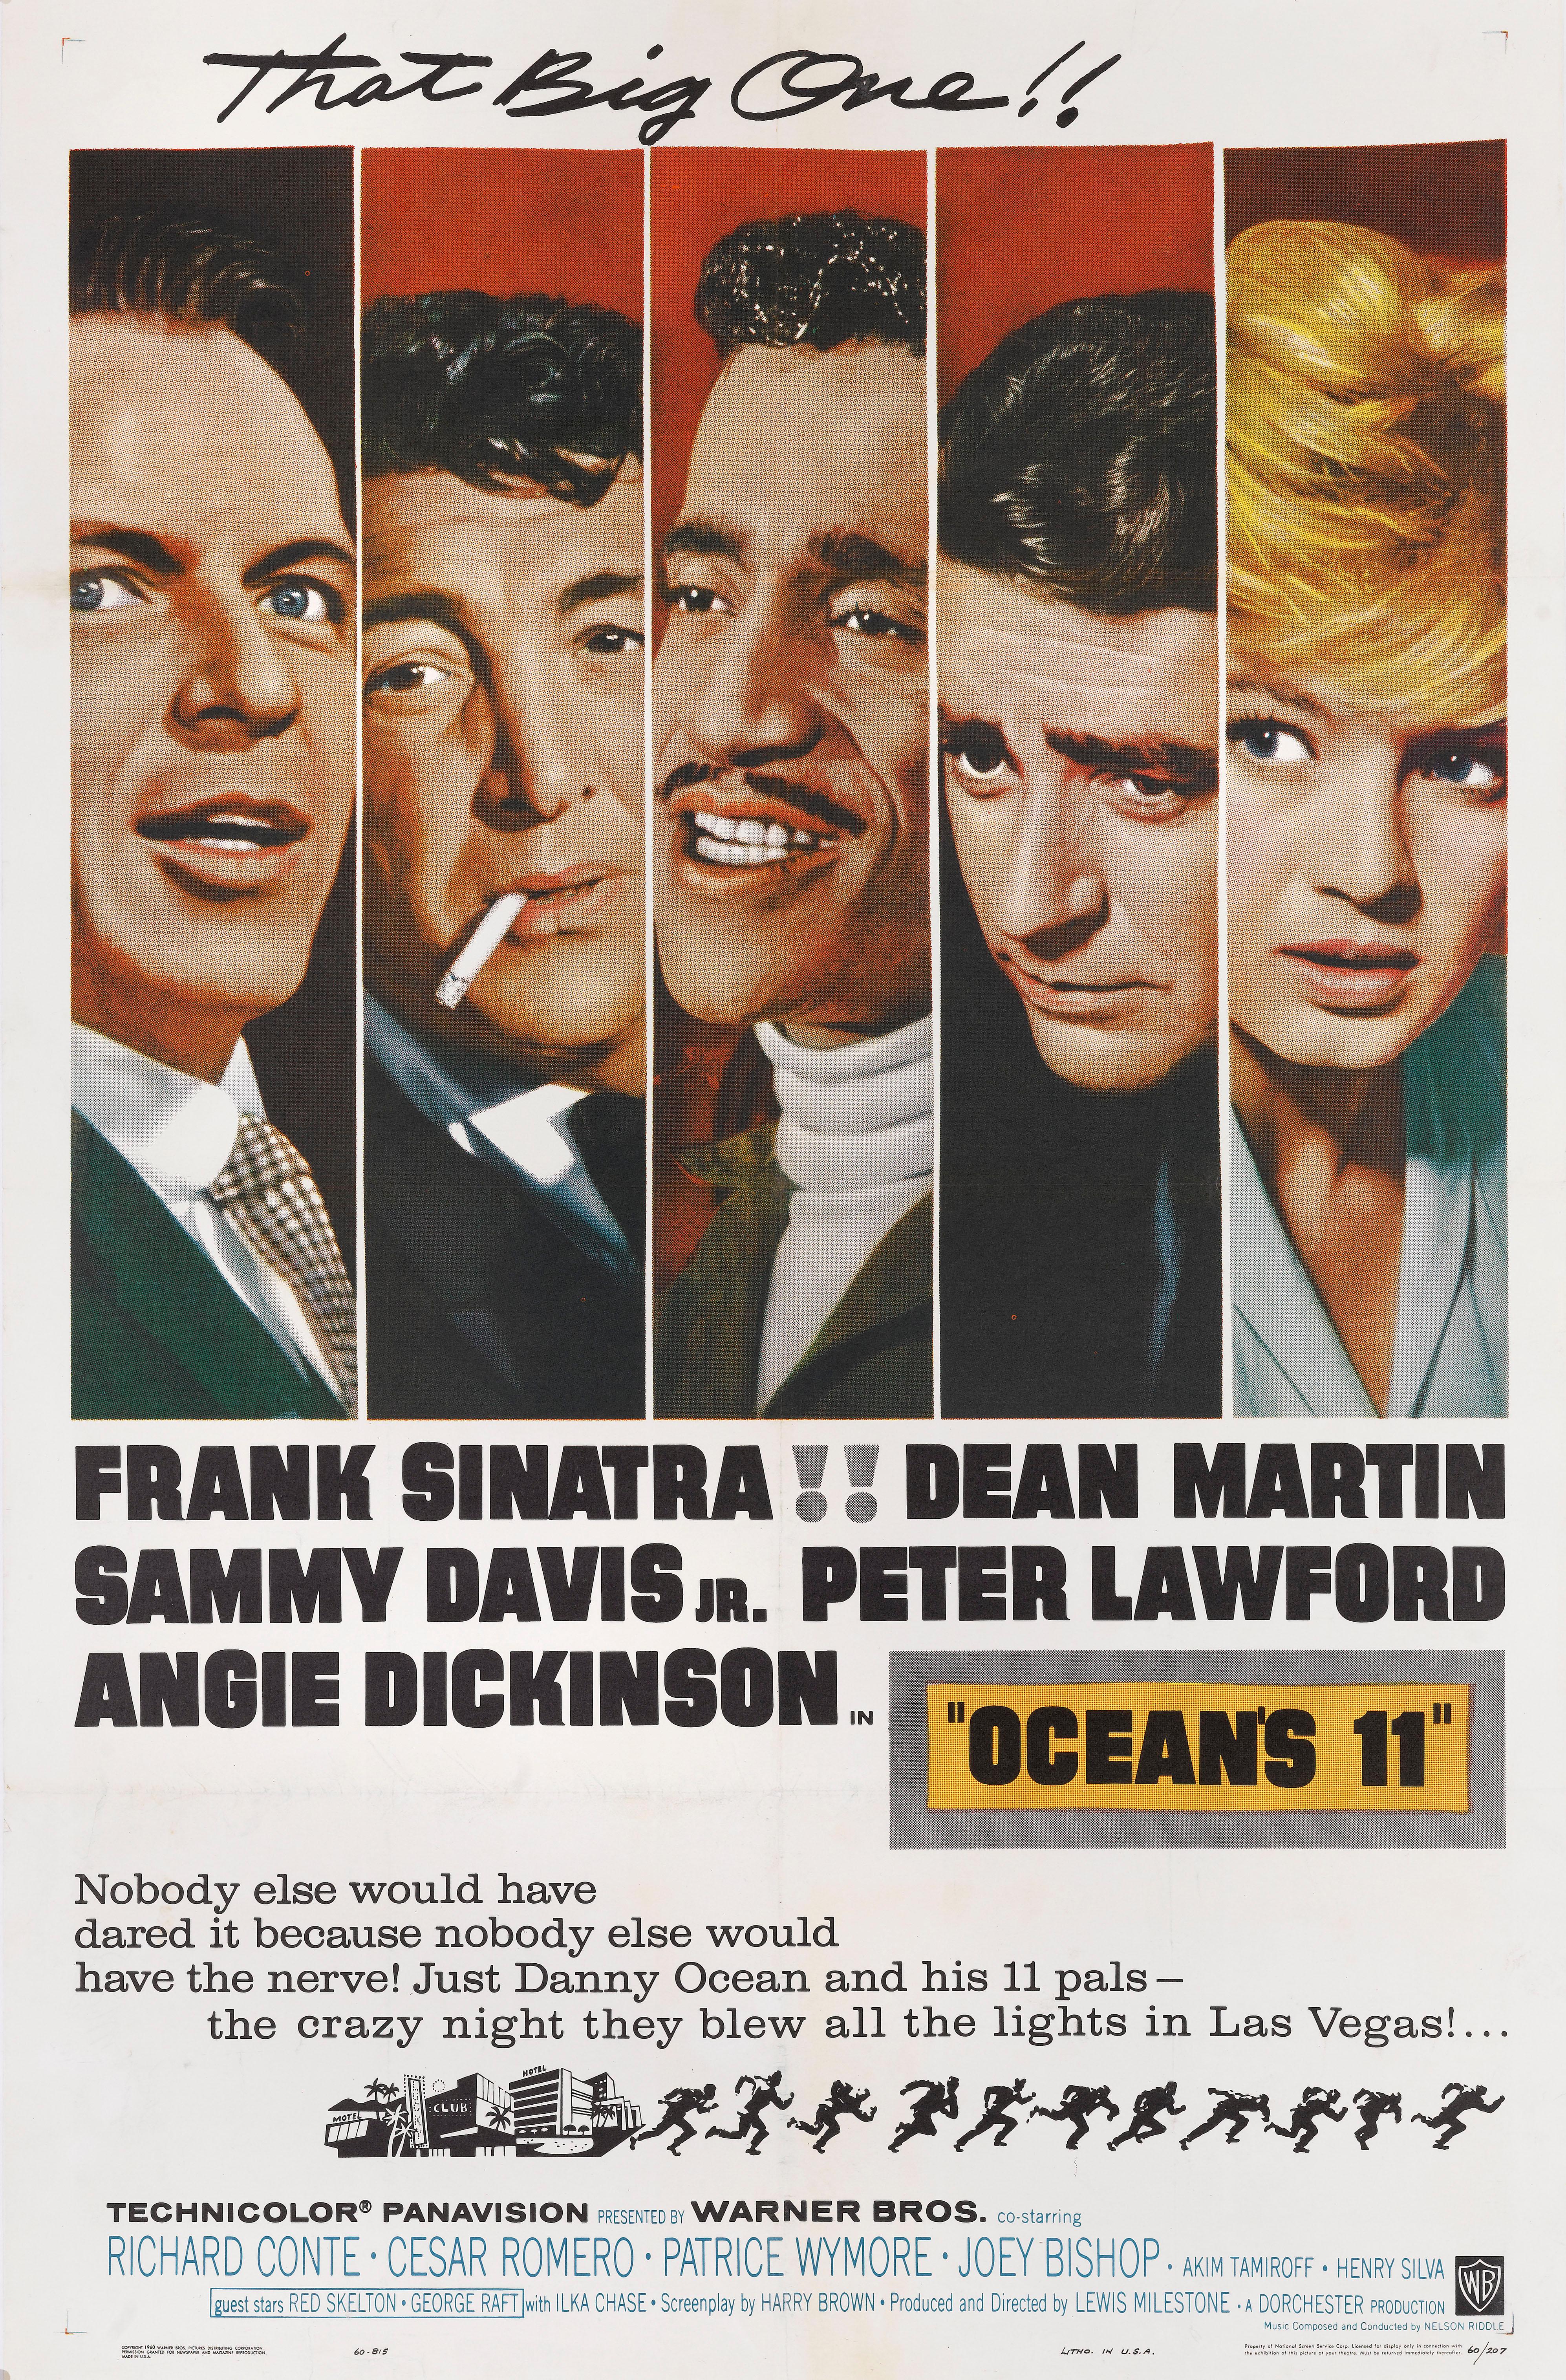 Original US Movie poster for Lewis Milestone's classic 1960 crime comedy starring the 